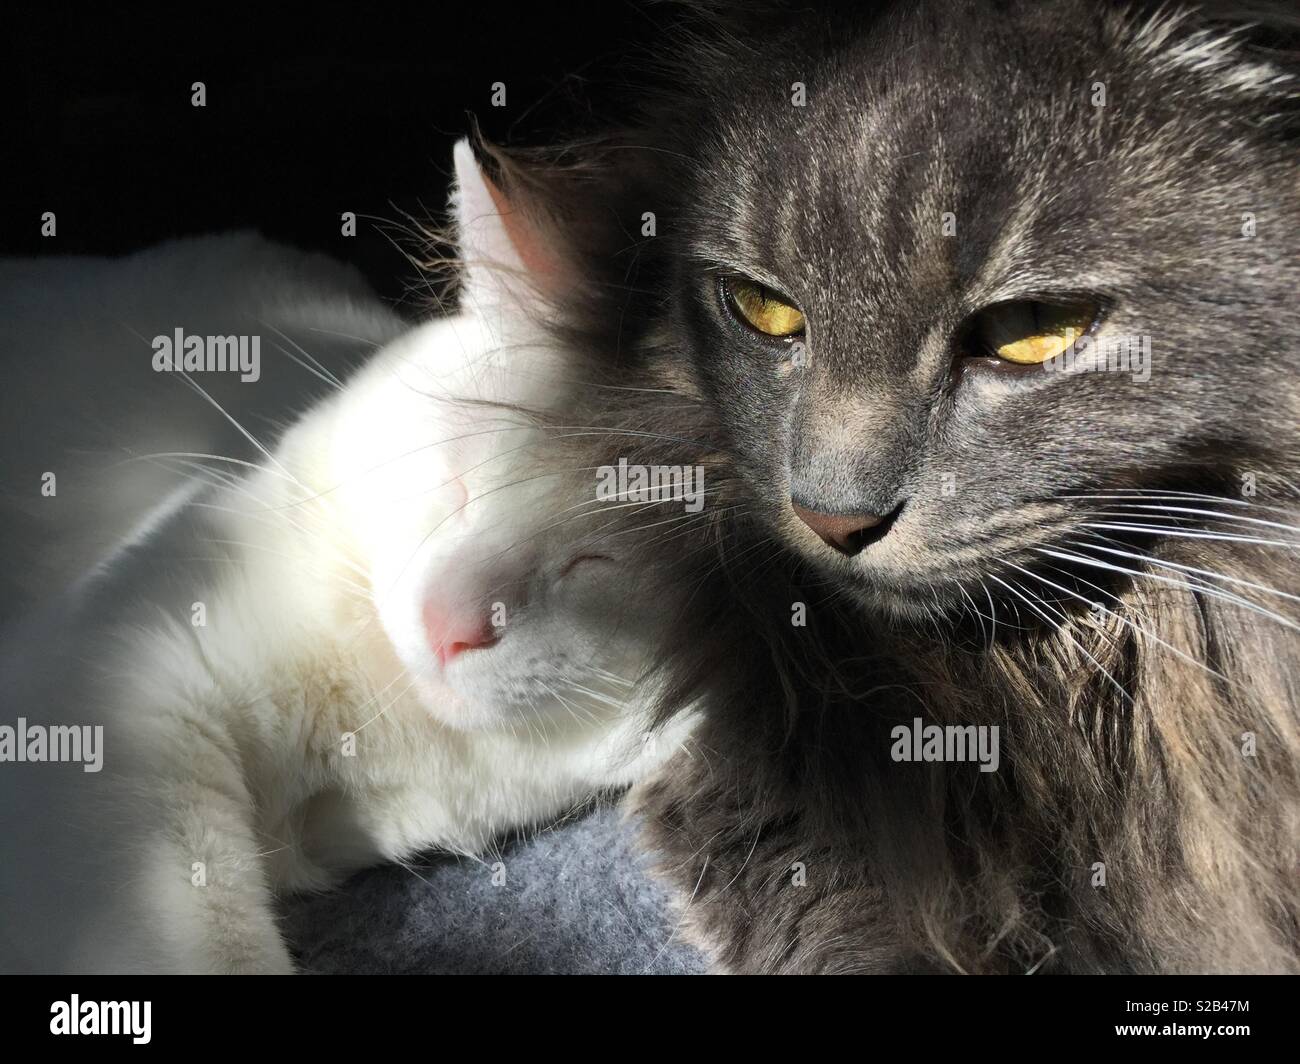 Sister cats, love cats, resting together in a sunbeam. One white cat, one gray cat with yellow eyes. Stock Photo